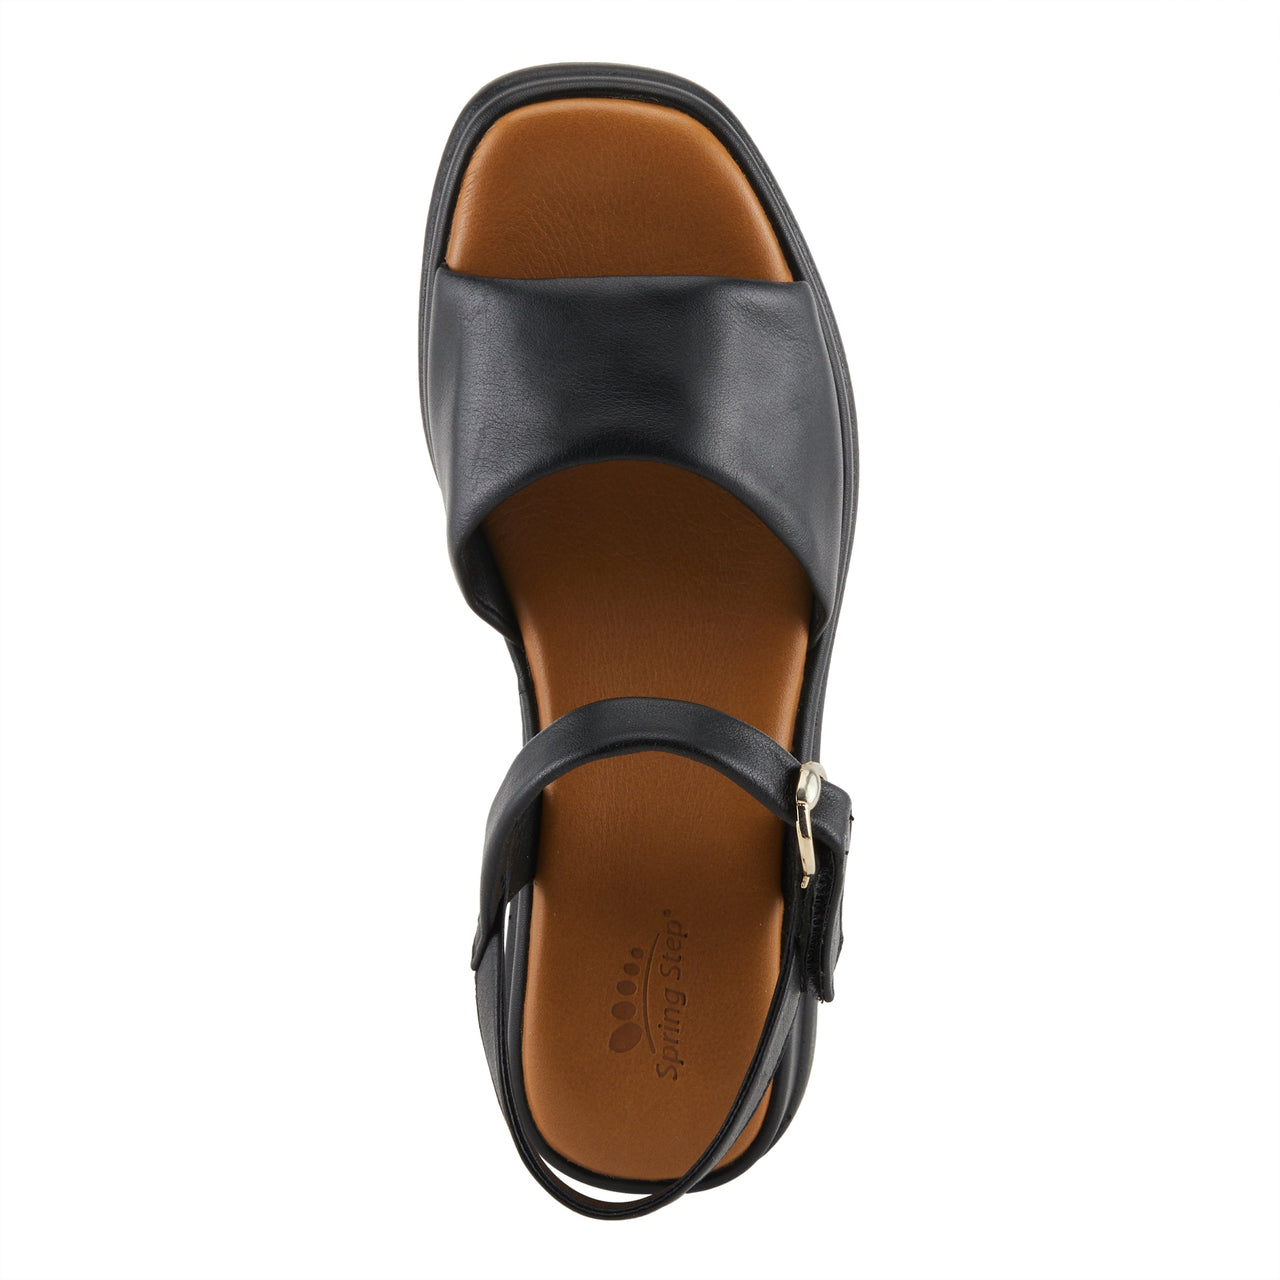 Spring Step Huntington Sandals featuring open-toe design